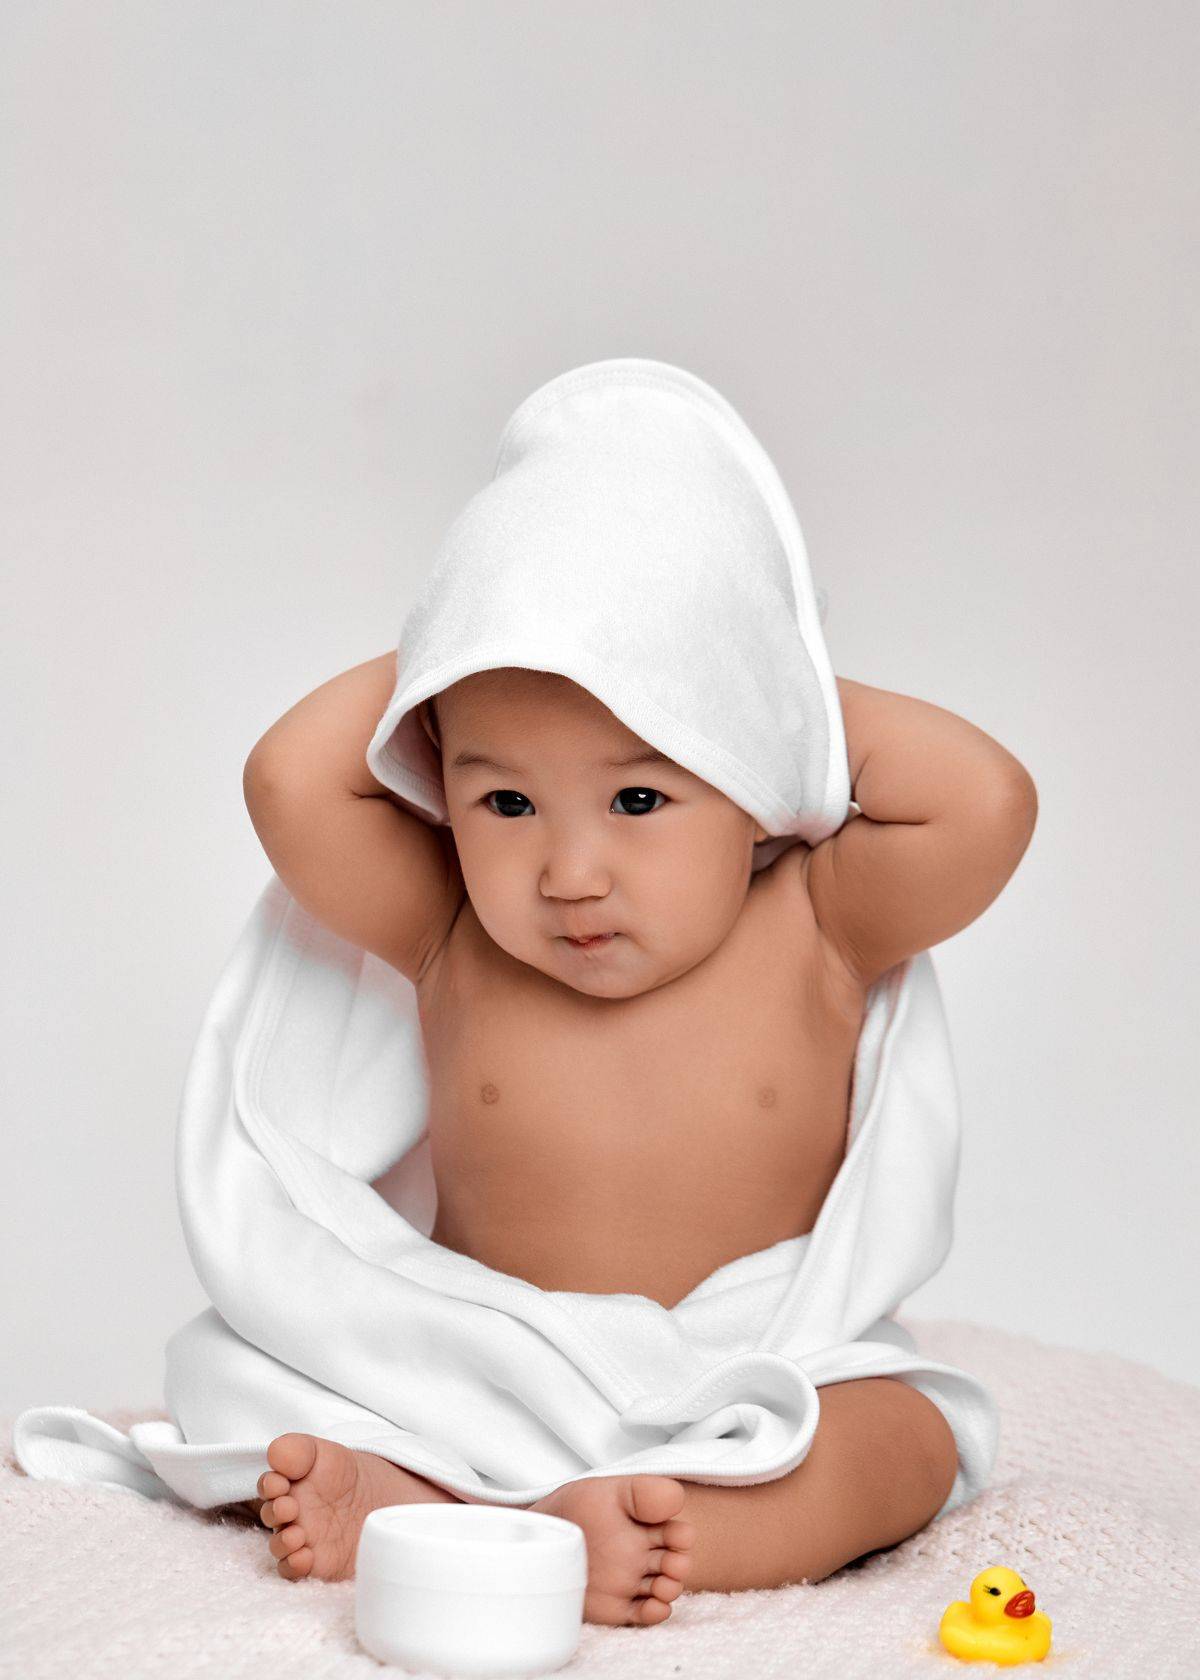 Is Calamine Lotion For Baby Safe? Find out here!